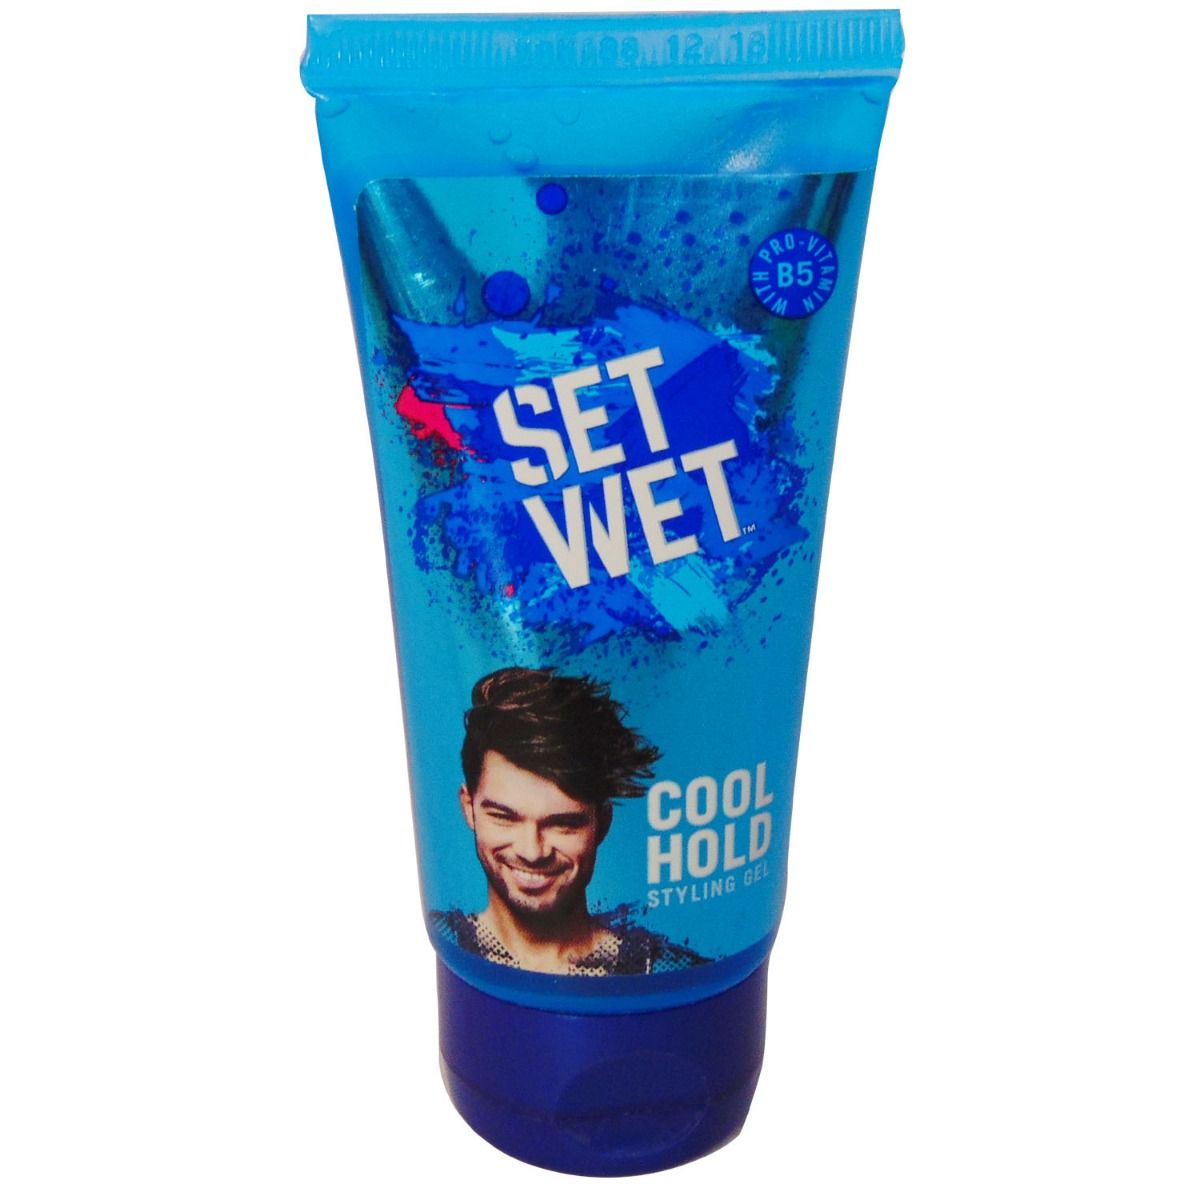 Set Wet Cool Hold Hair Styling Gel, 50 ml Price, Uses, Side Effects,  Composition - Apollo Pharmacy